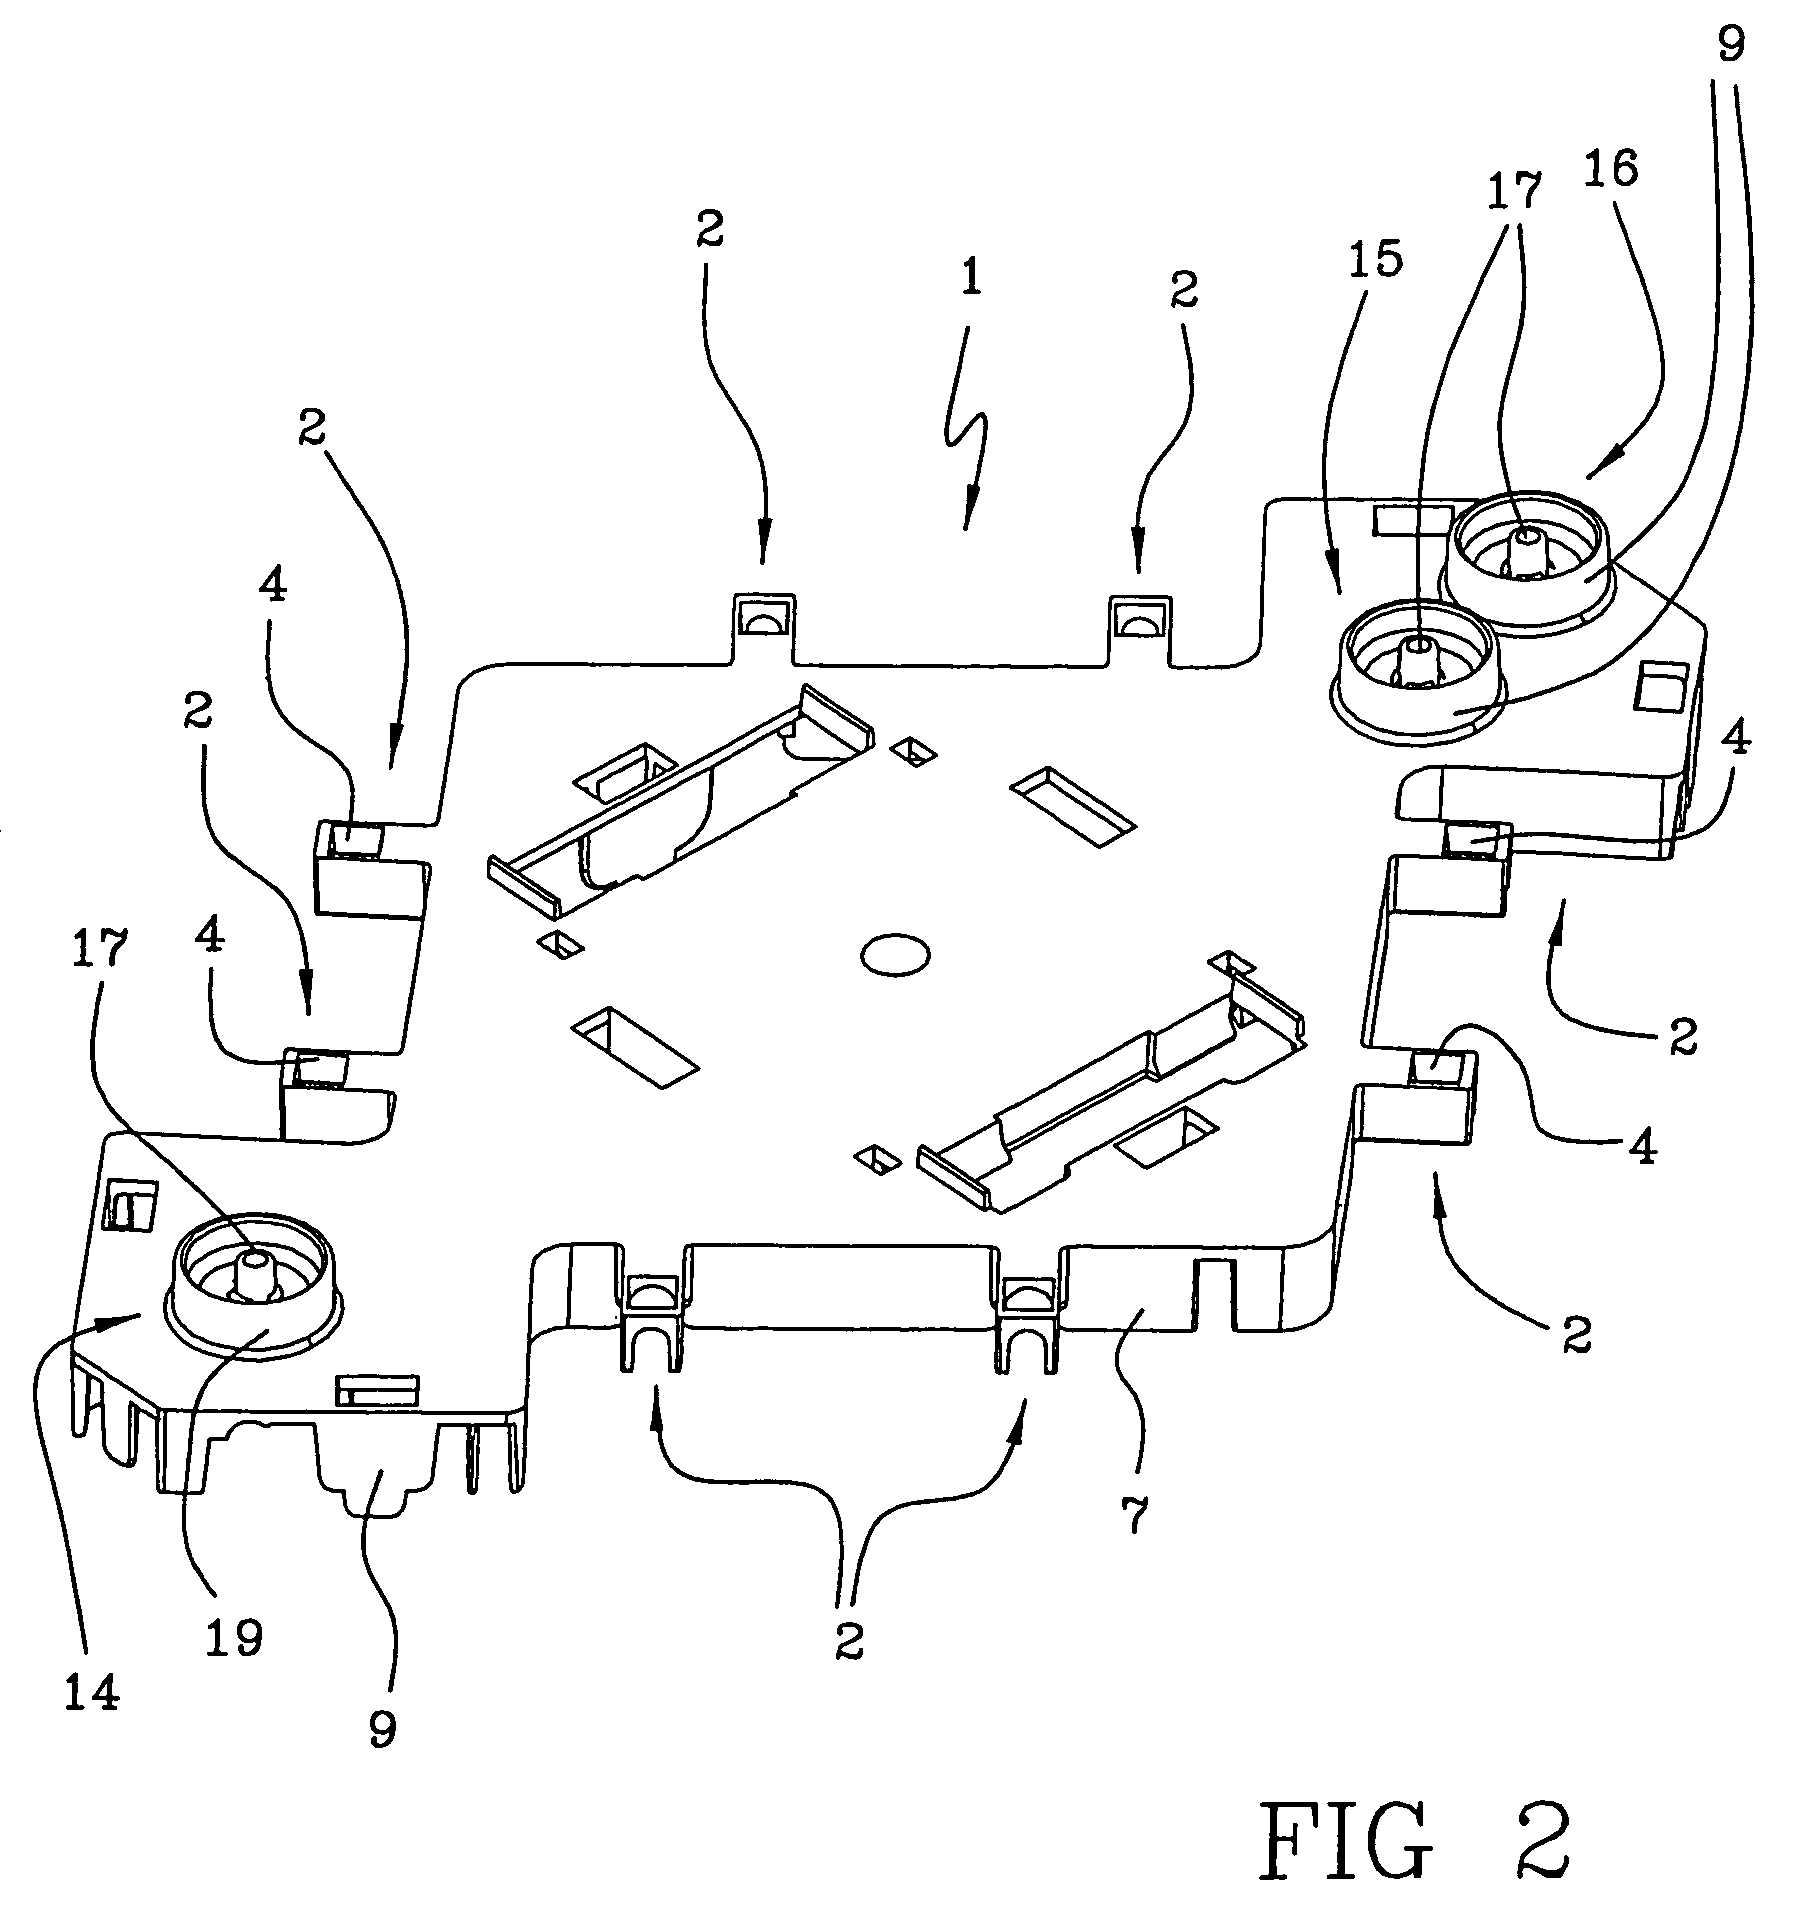 Support element, an integrated module for extracorporeal blood treatment comprising the support element, an apparatus for extracorporeal blood treatment equipped with the integrated module, and an assembly process for an integrated module for extracorporeal blood treatment